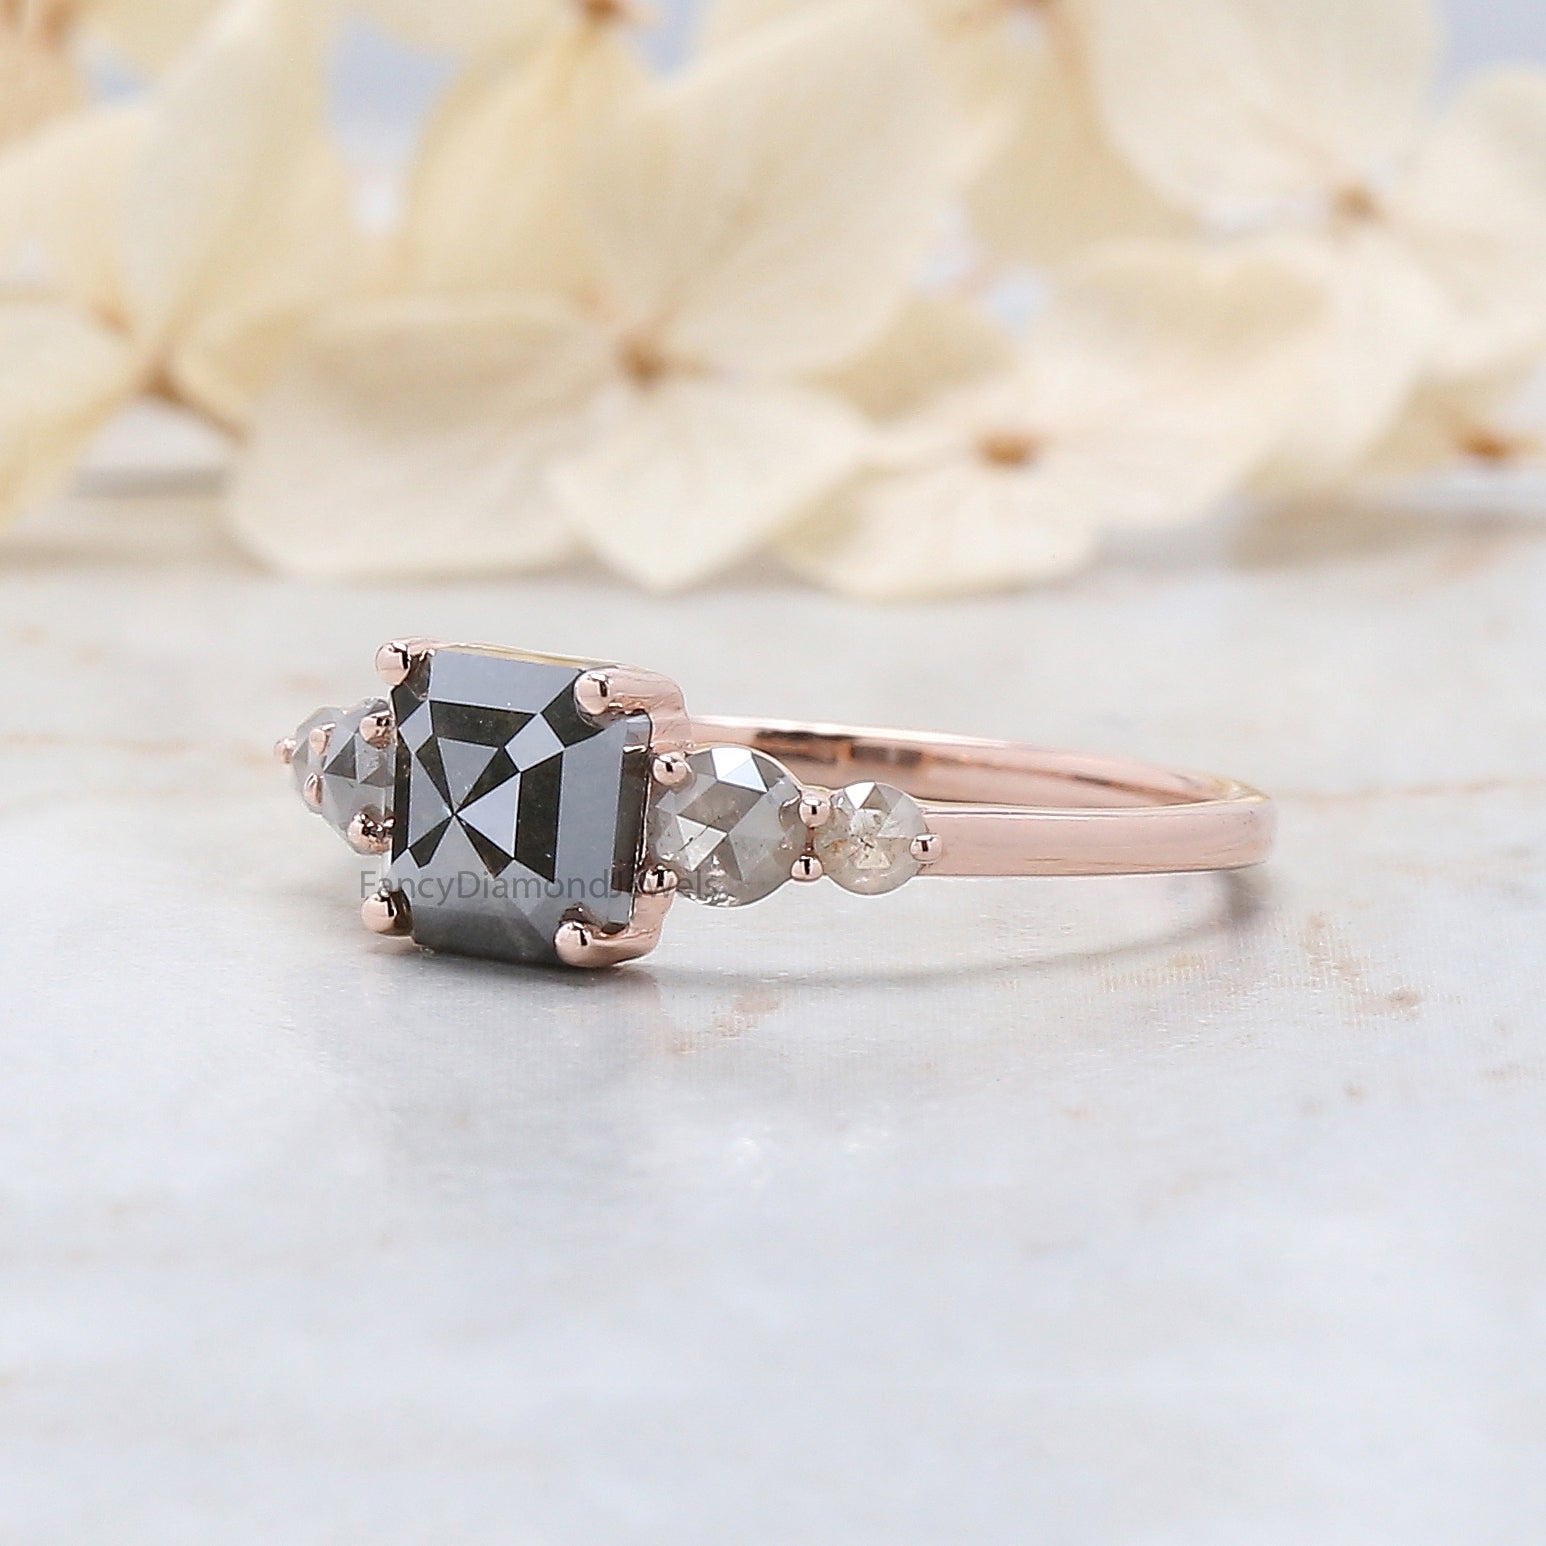 Emerald Cut Salt And Pepper Diamond Ring 1.06 Ct 5.85 MM Emerald Diamond Ring 14K Solid Rose Gold Silver Engagement Ring Gift For Her QN9247